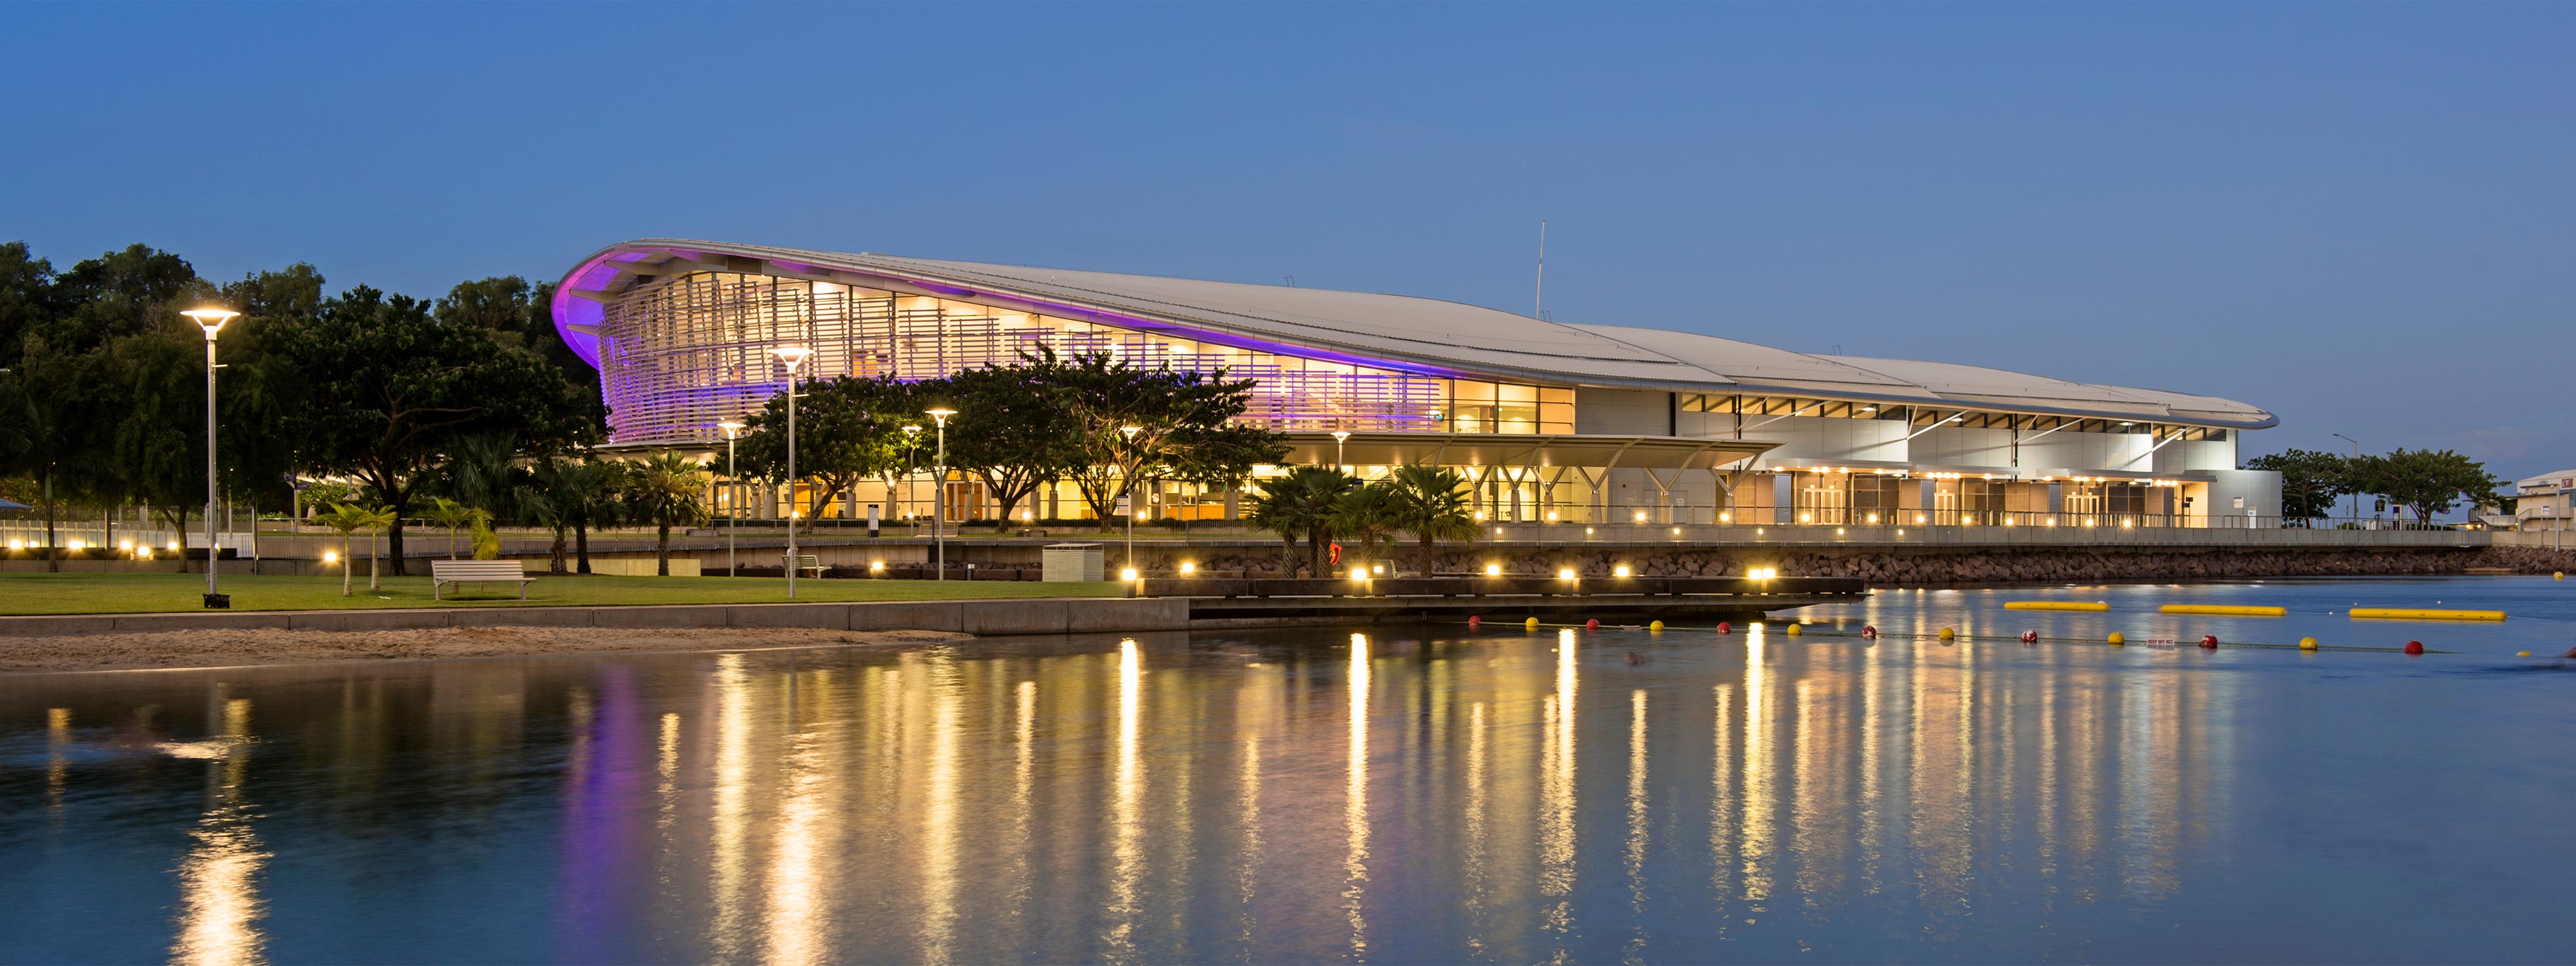 Darwin to host World Aquaculture Conference 2023